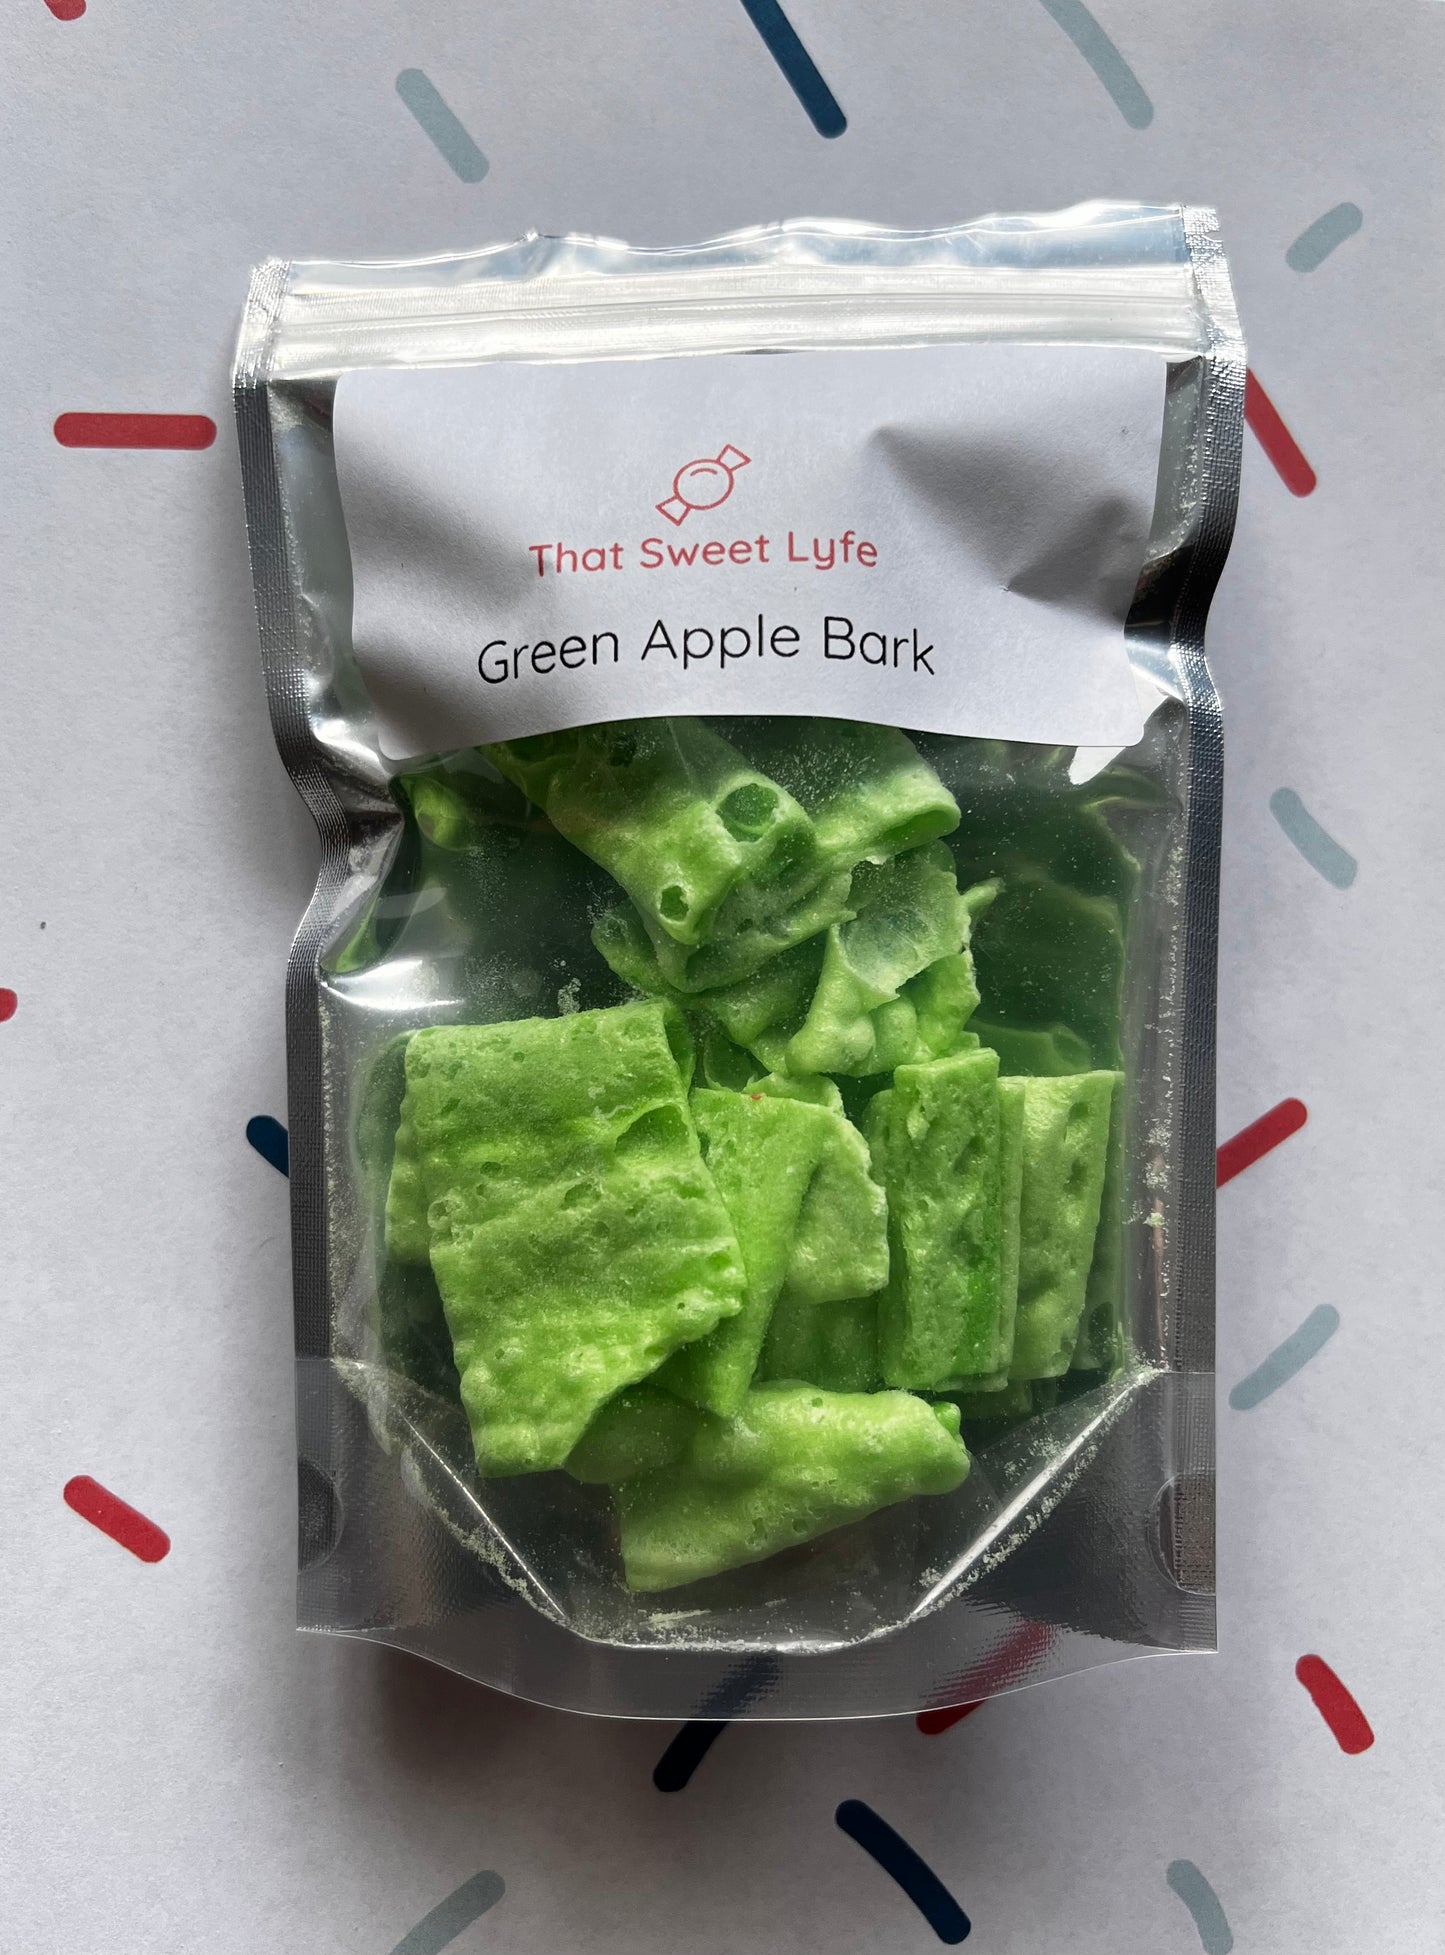 Silver zip-close bag filled with green freeze-dried jolly ranchers bark